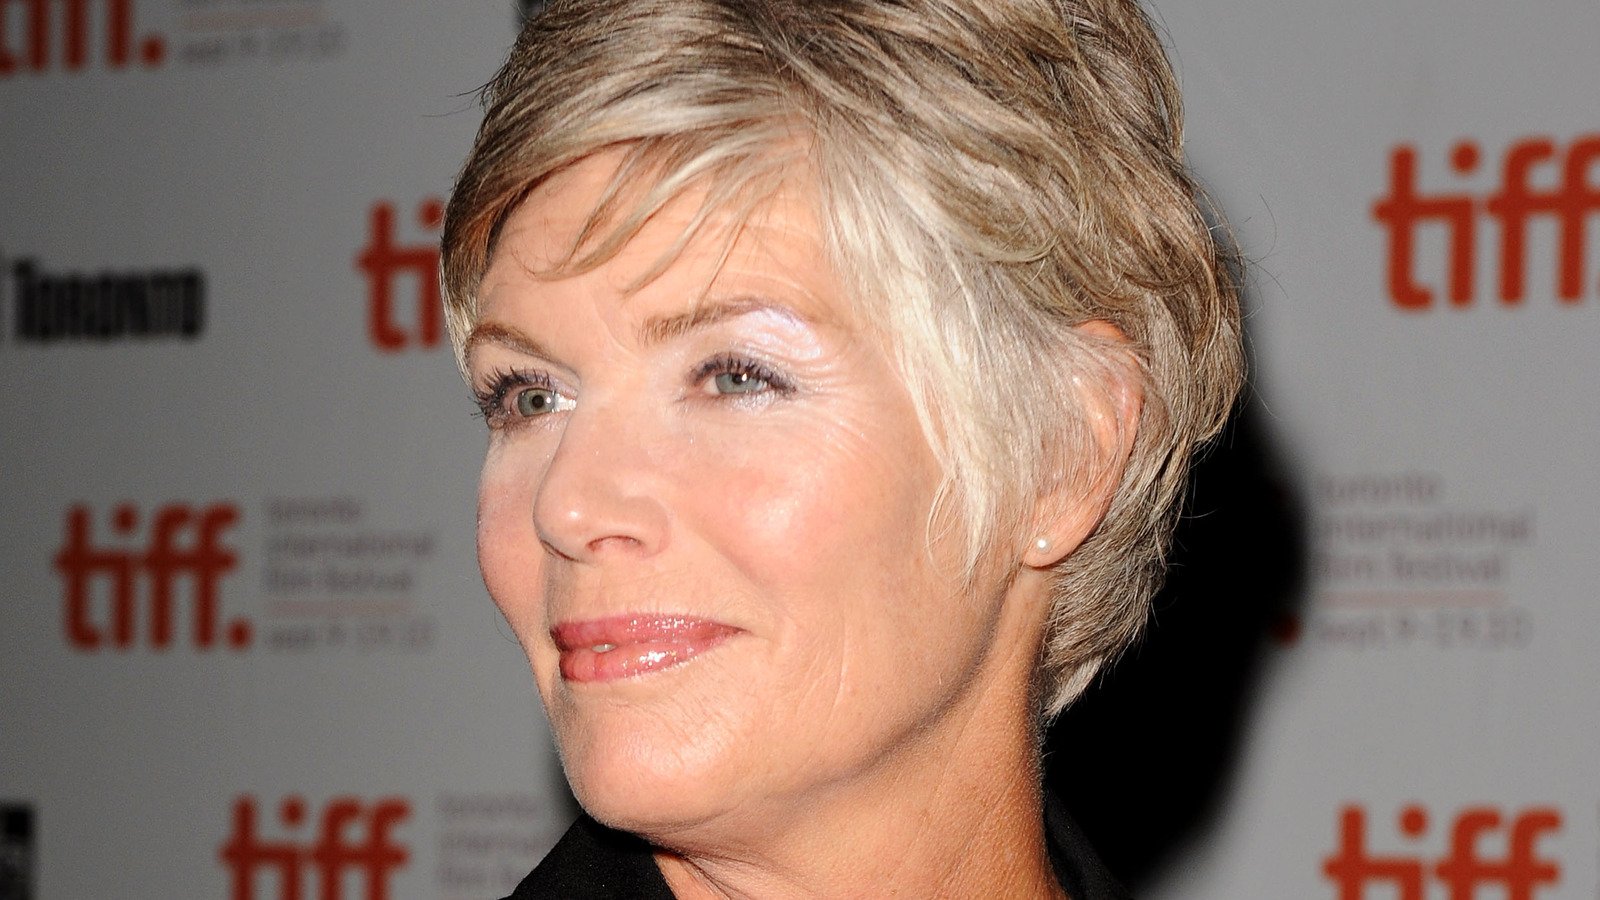 Top Gun's Kelly McGillis Confirms What We Suspected About Tom Cruise's On-Set Behavior - Looper